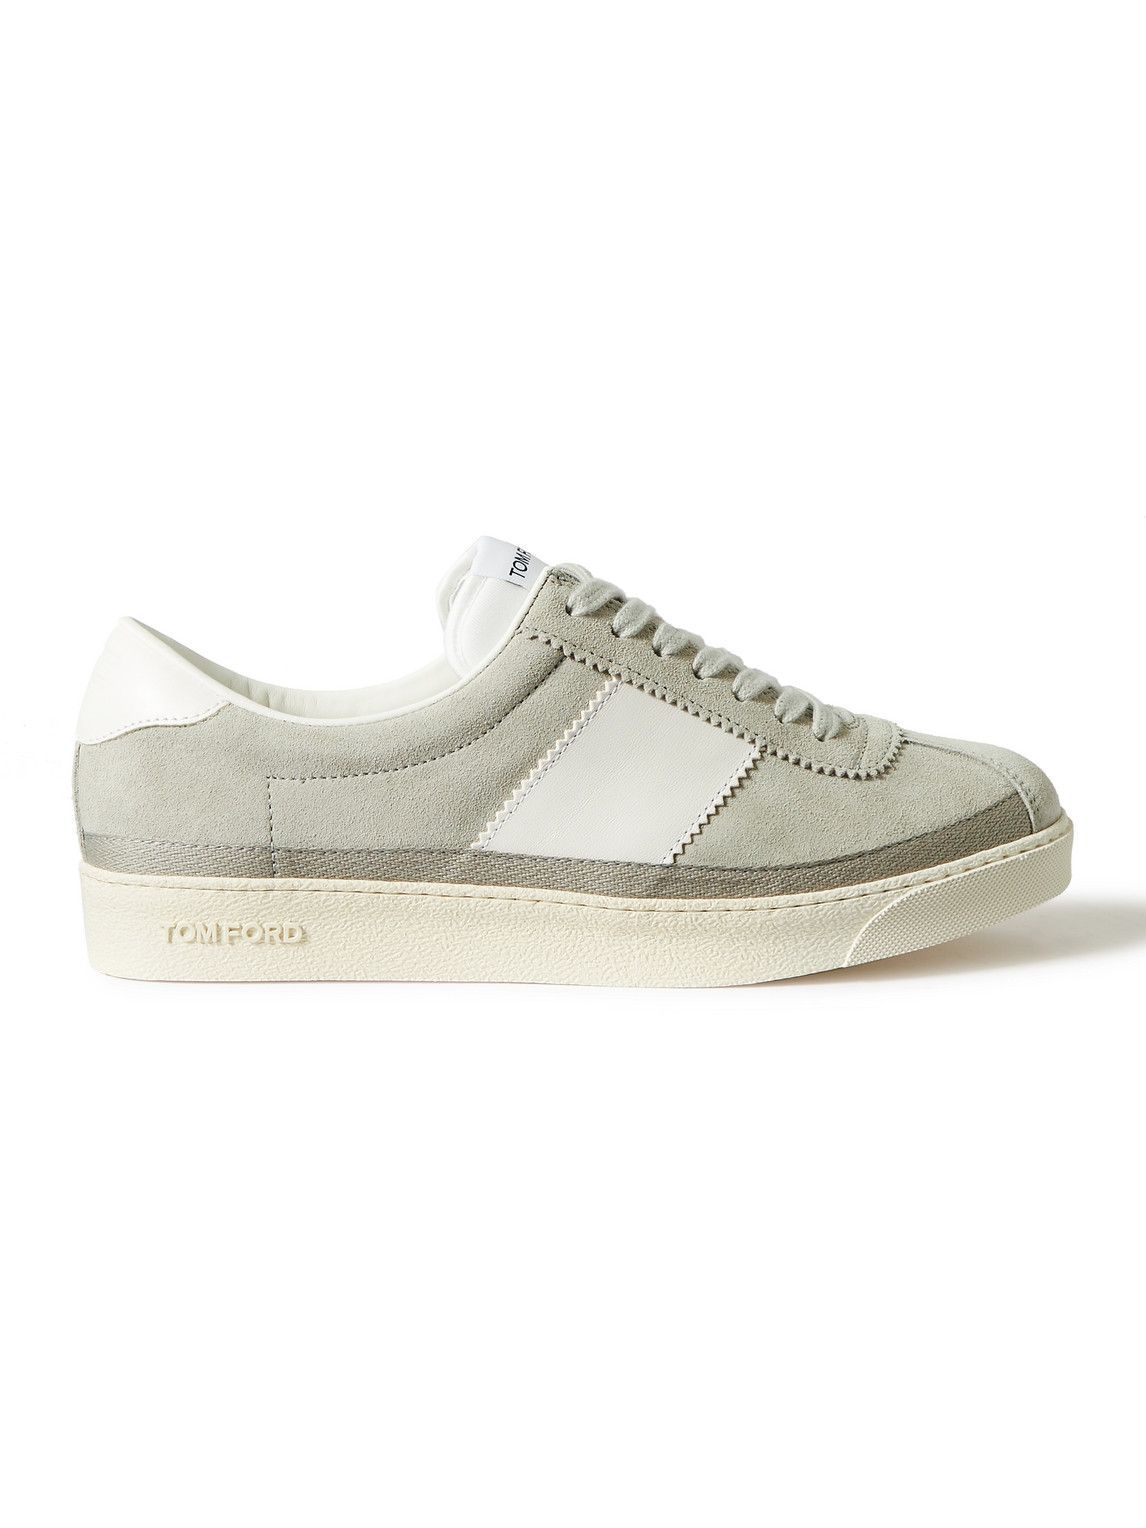 TOM FORD - Bannister Leather-Trimmed Suede Sneakers - Gray TOM FORD